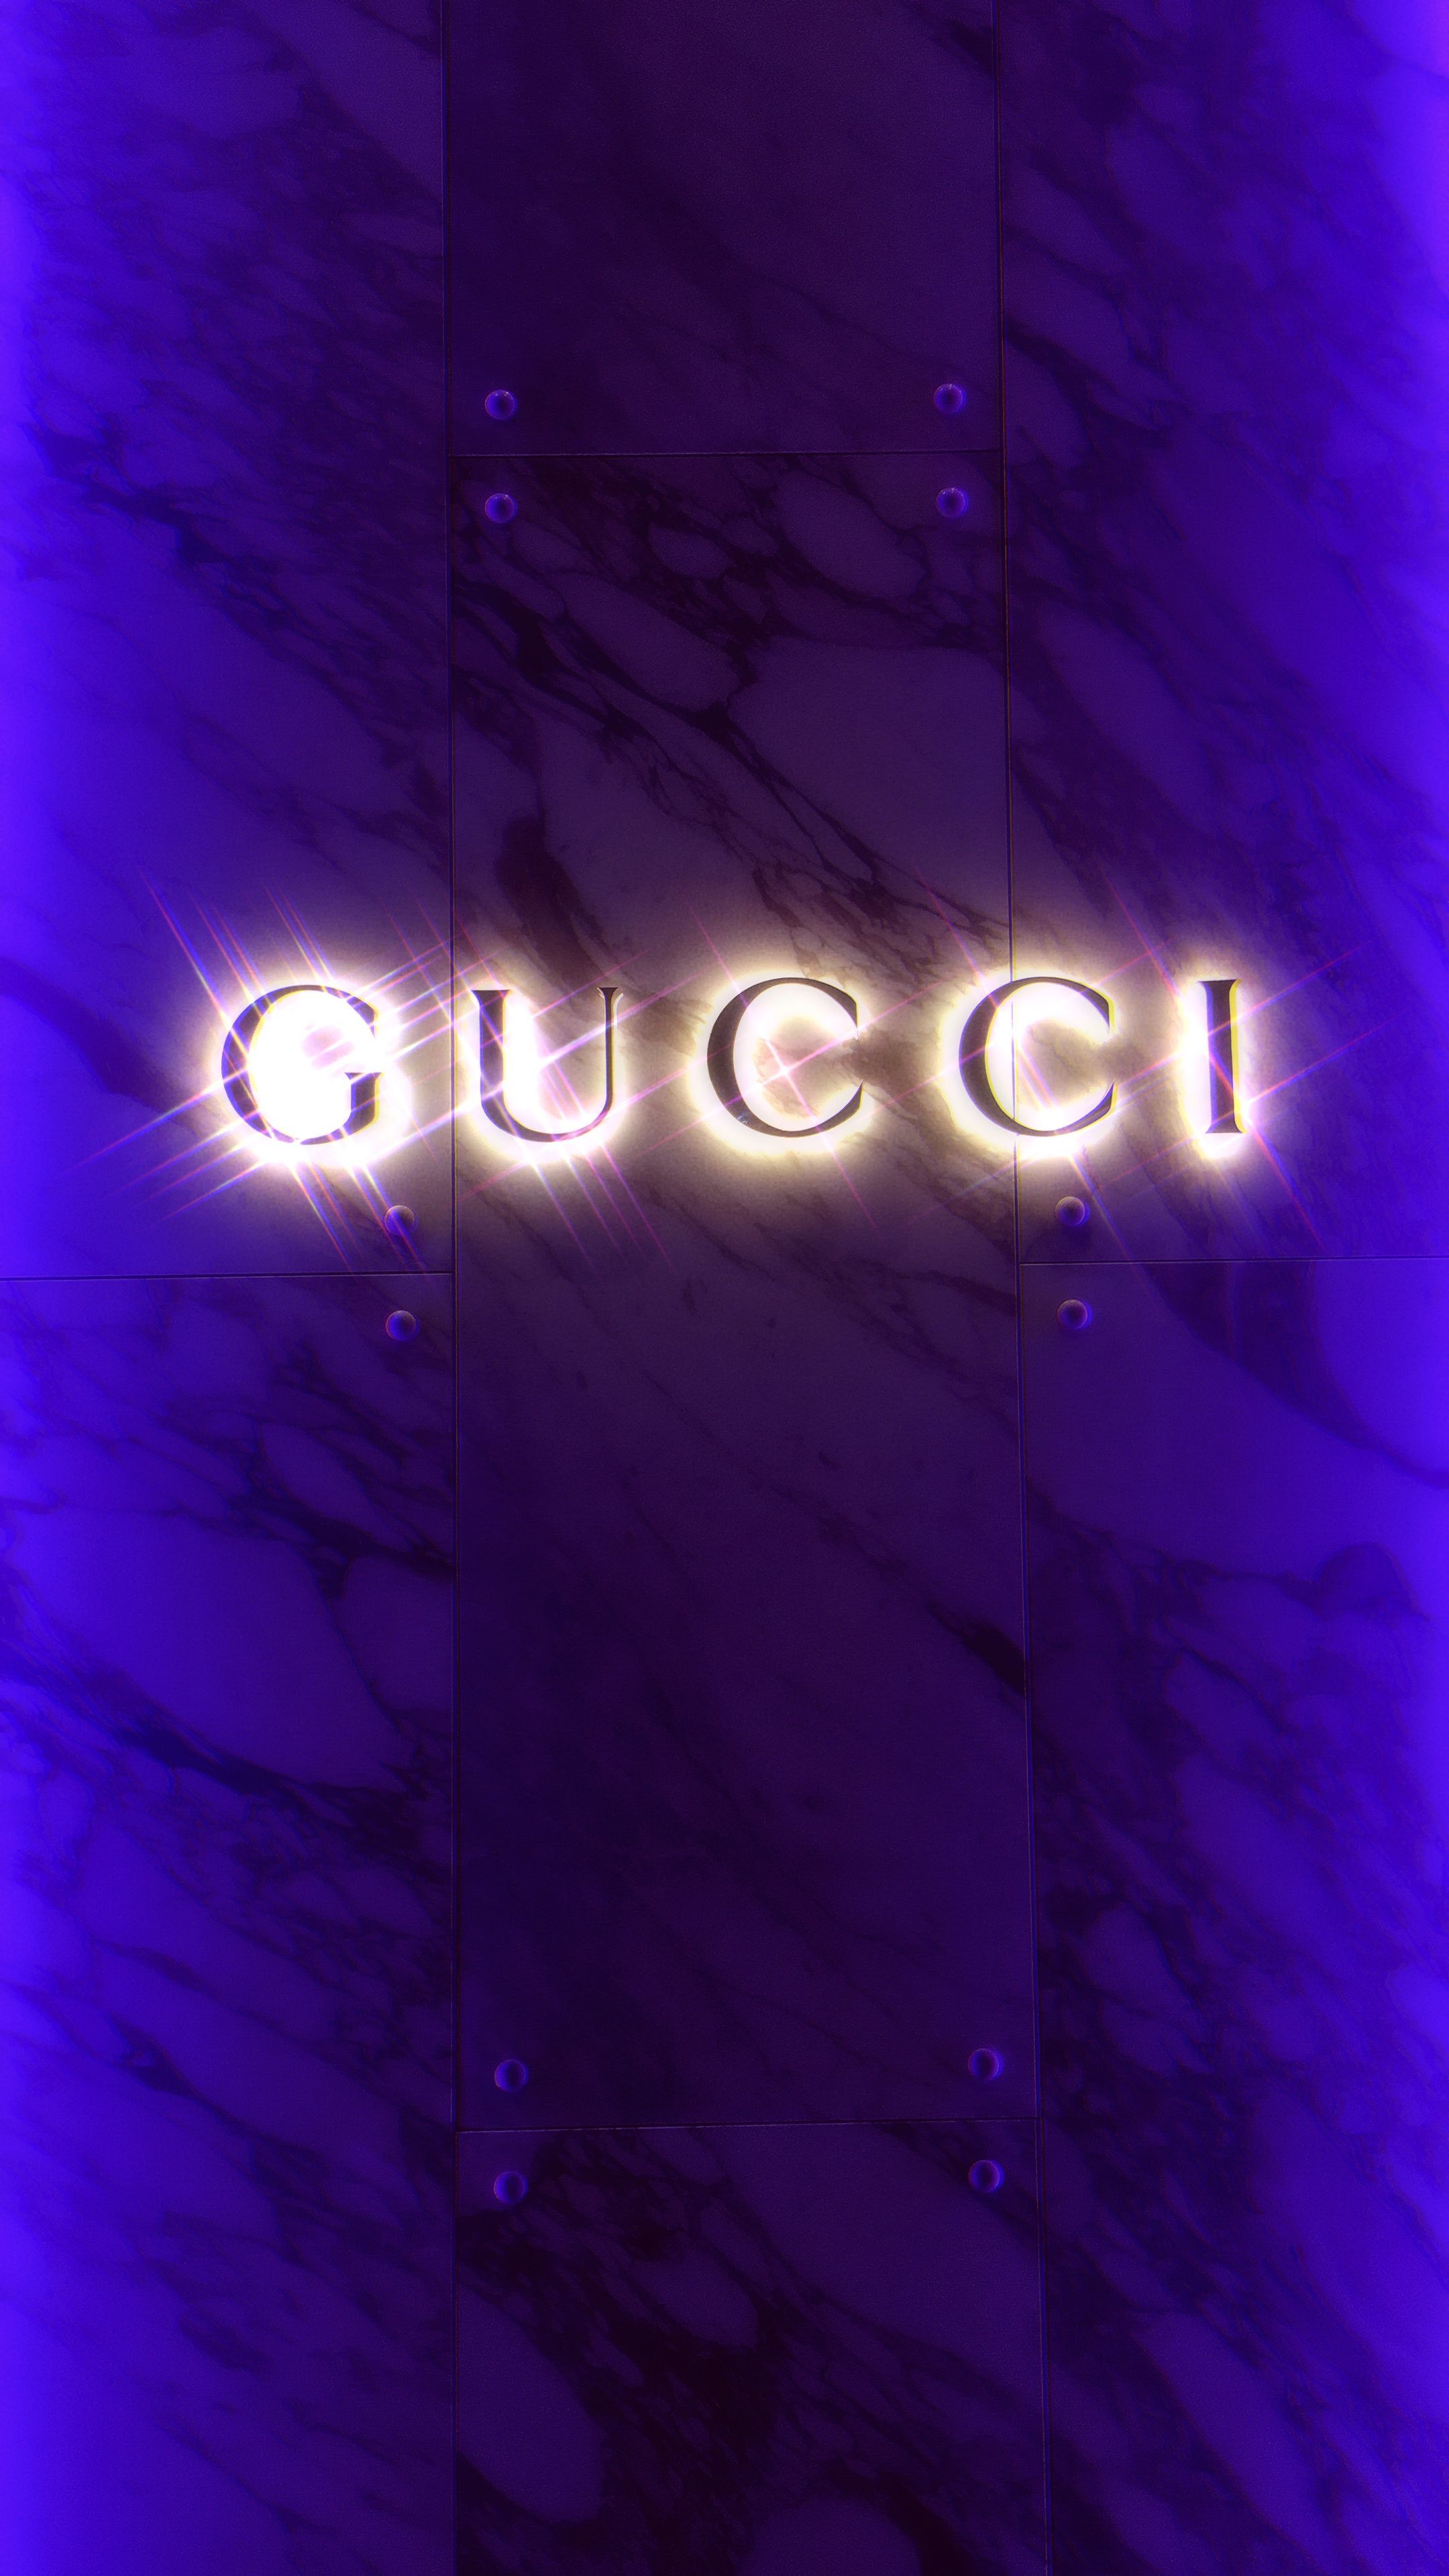 Gucci gang  Gucci wallpaper iphone, Phone wallpapers vintage